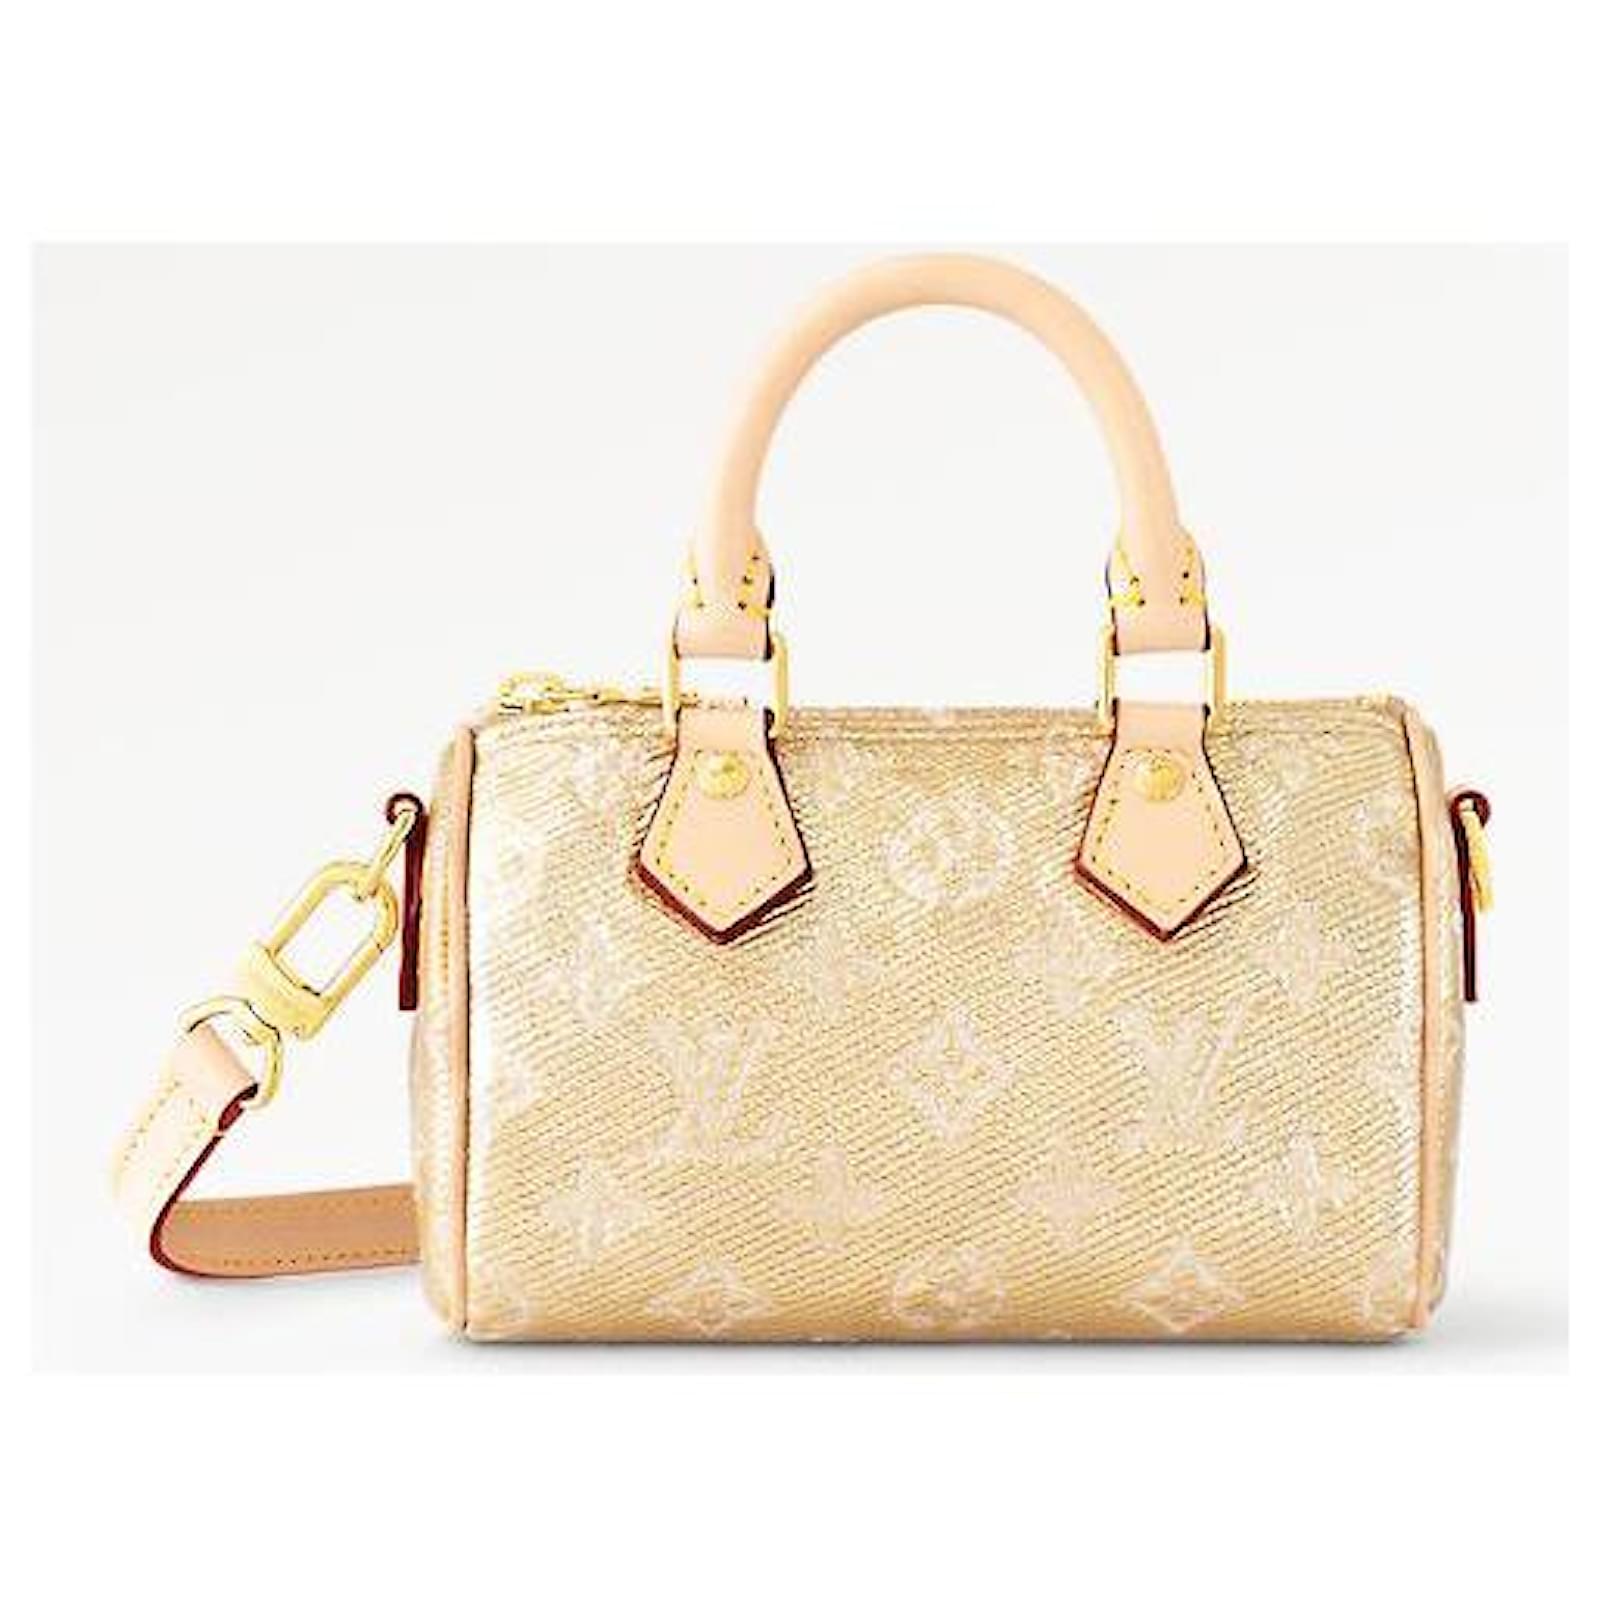 Yoogi's Closet - The coveted Louis Vuitton Nano Speedy Bag will be  available on today's latest arrivals!